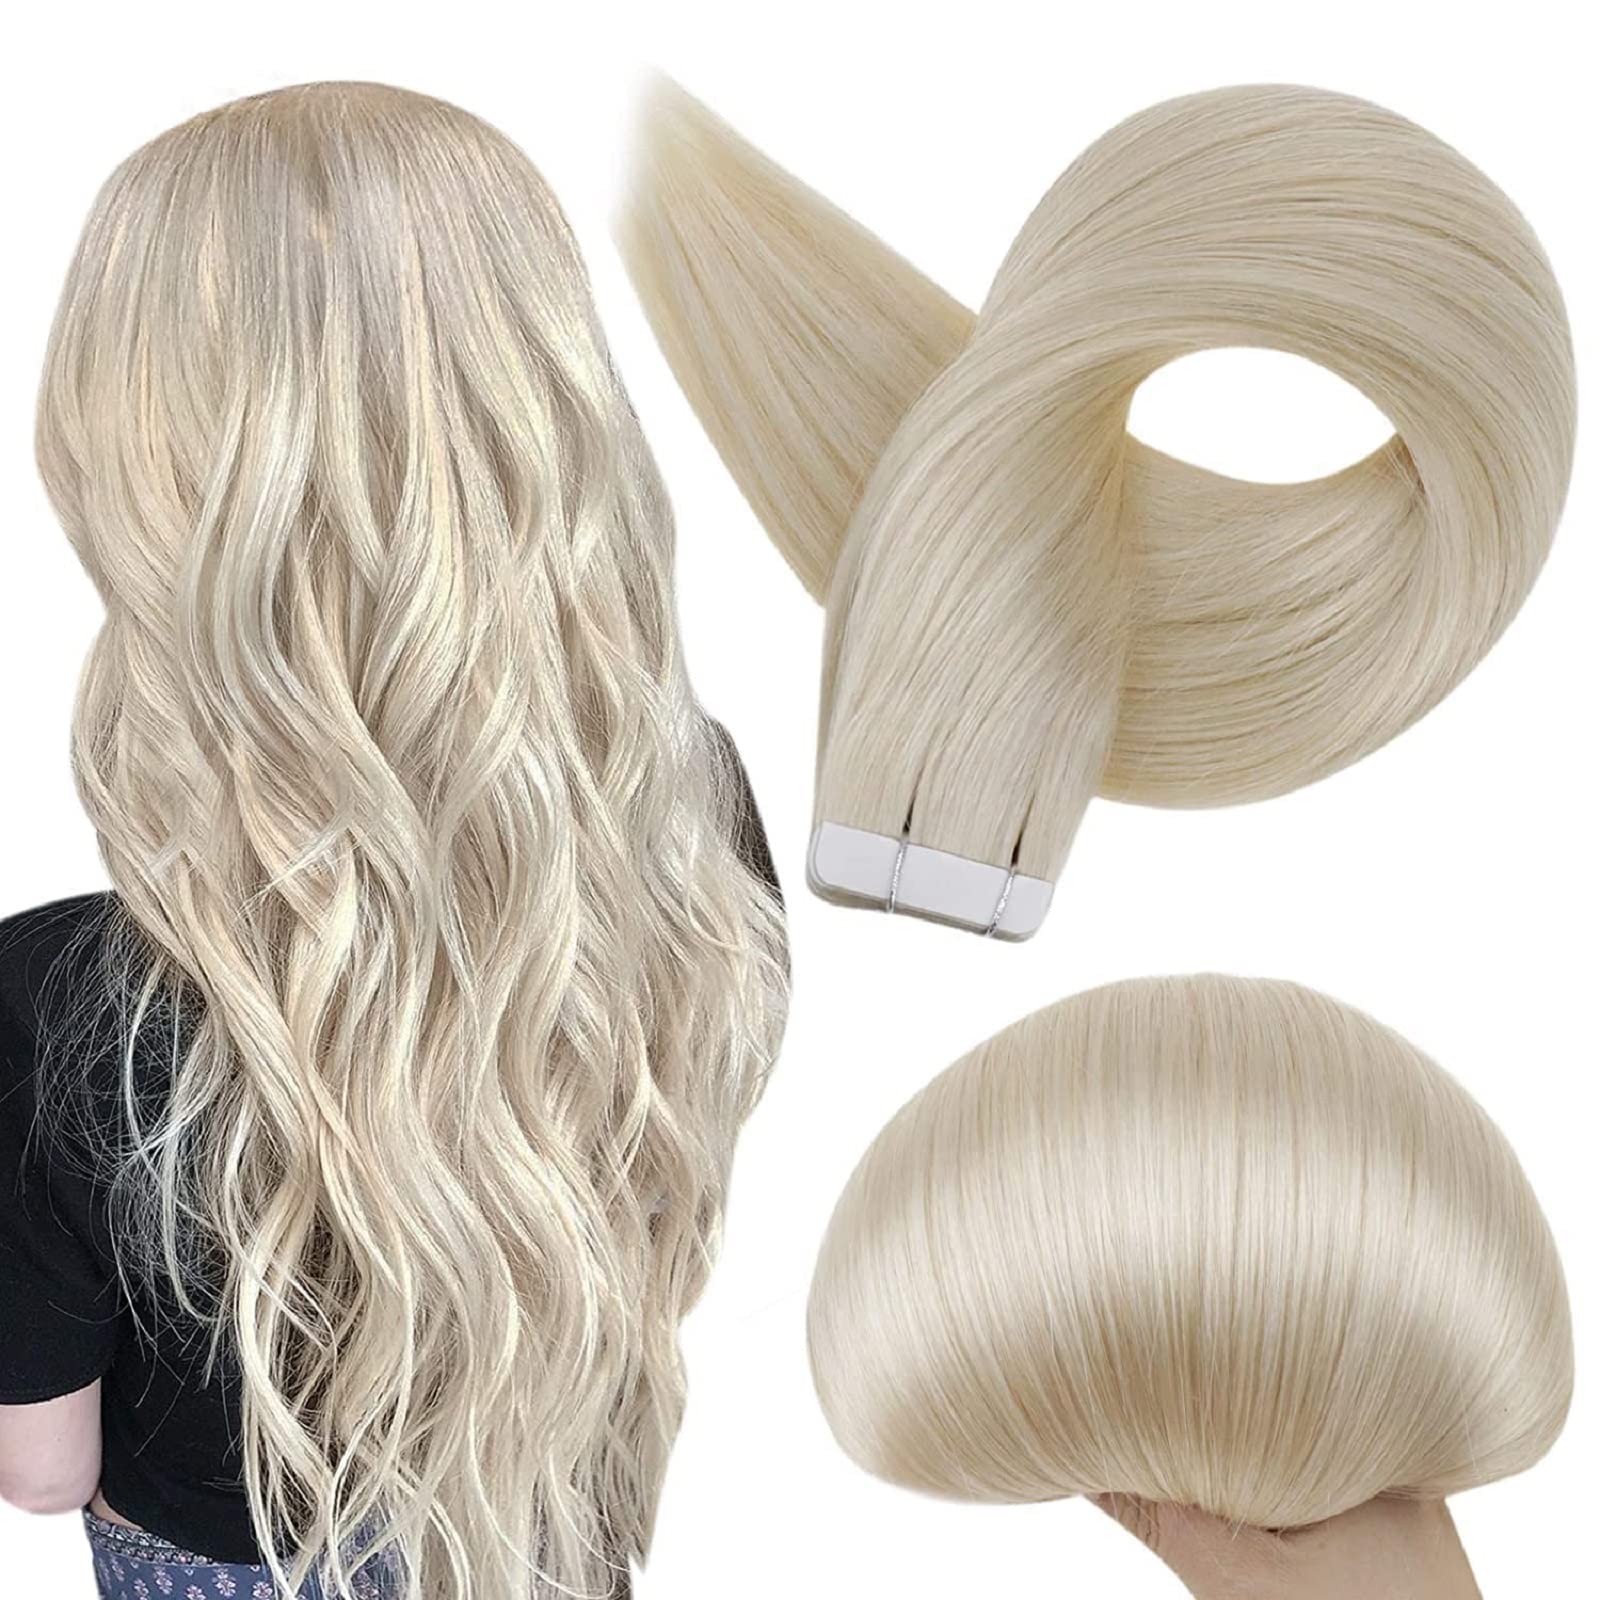 Full Shine Tape in Hair Extensions Human Hair 60 Platinum Blonde Tape Hair Extensions Real Hair 18 Inch Seamless Skin Weft Hair Extensions 50 Grams 20 Pieces